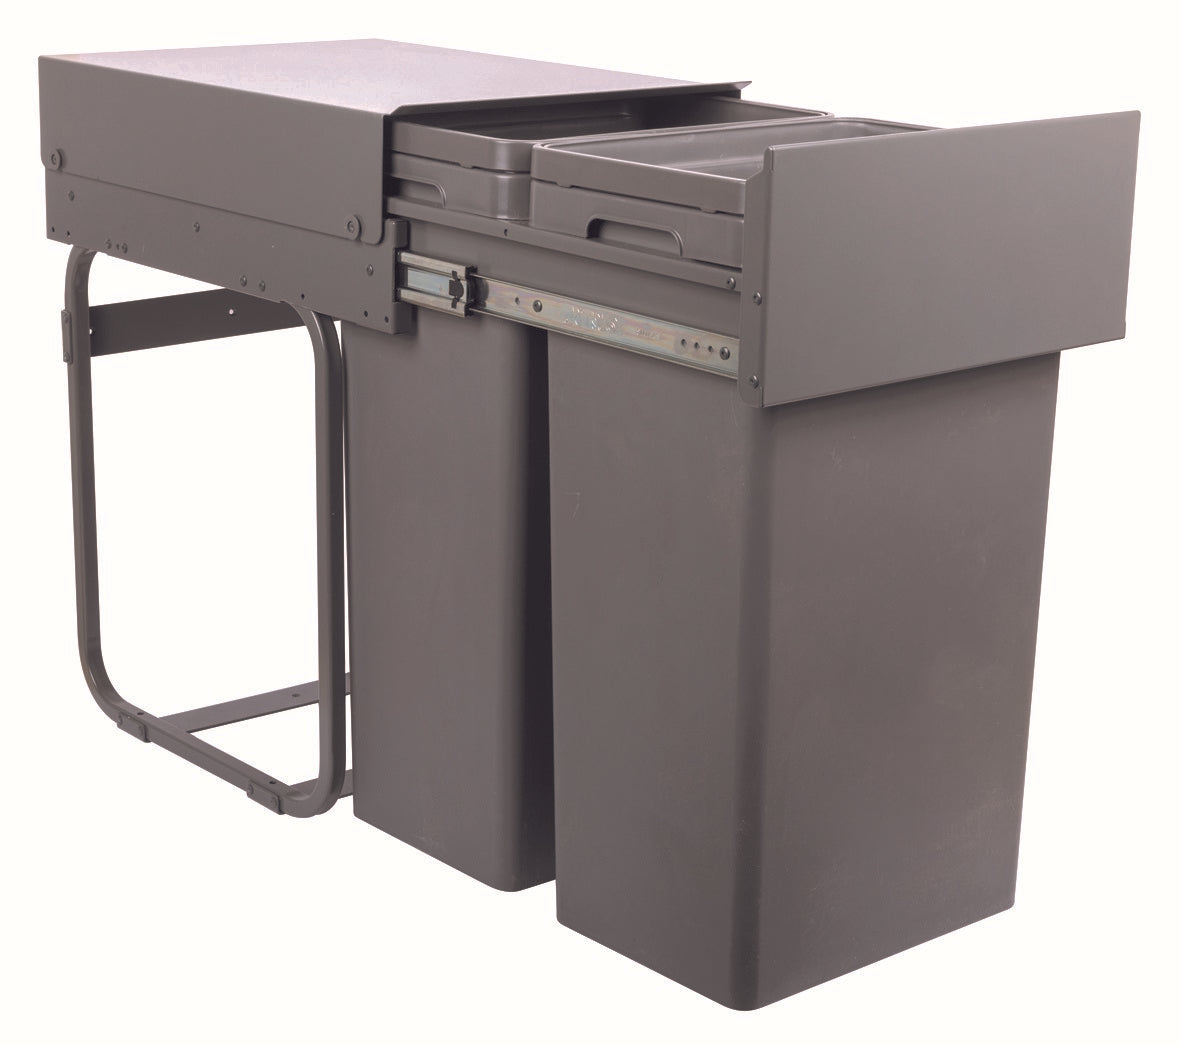 The Hafele 2-Compartment 64L Integrated Recycling Bin has a strong stteel frame, lid and front panel all in dark grey powder coasted steel.